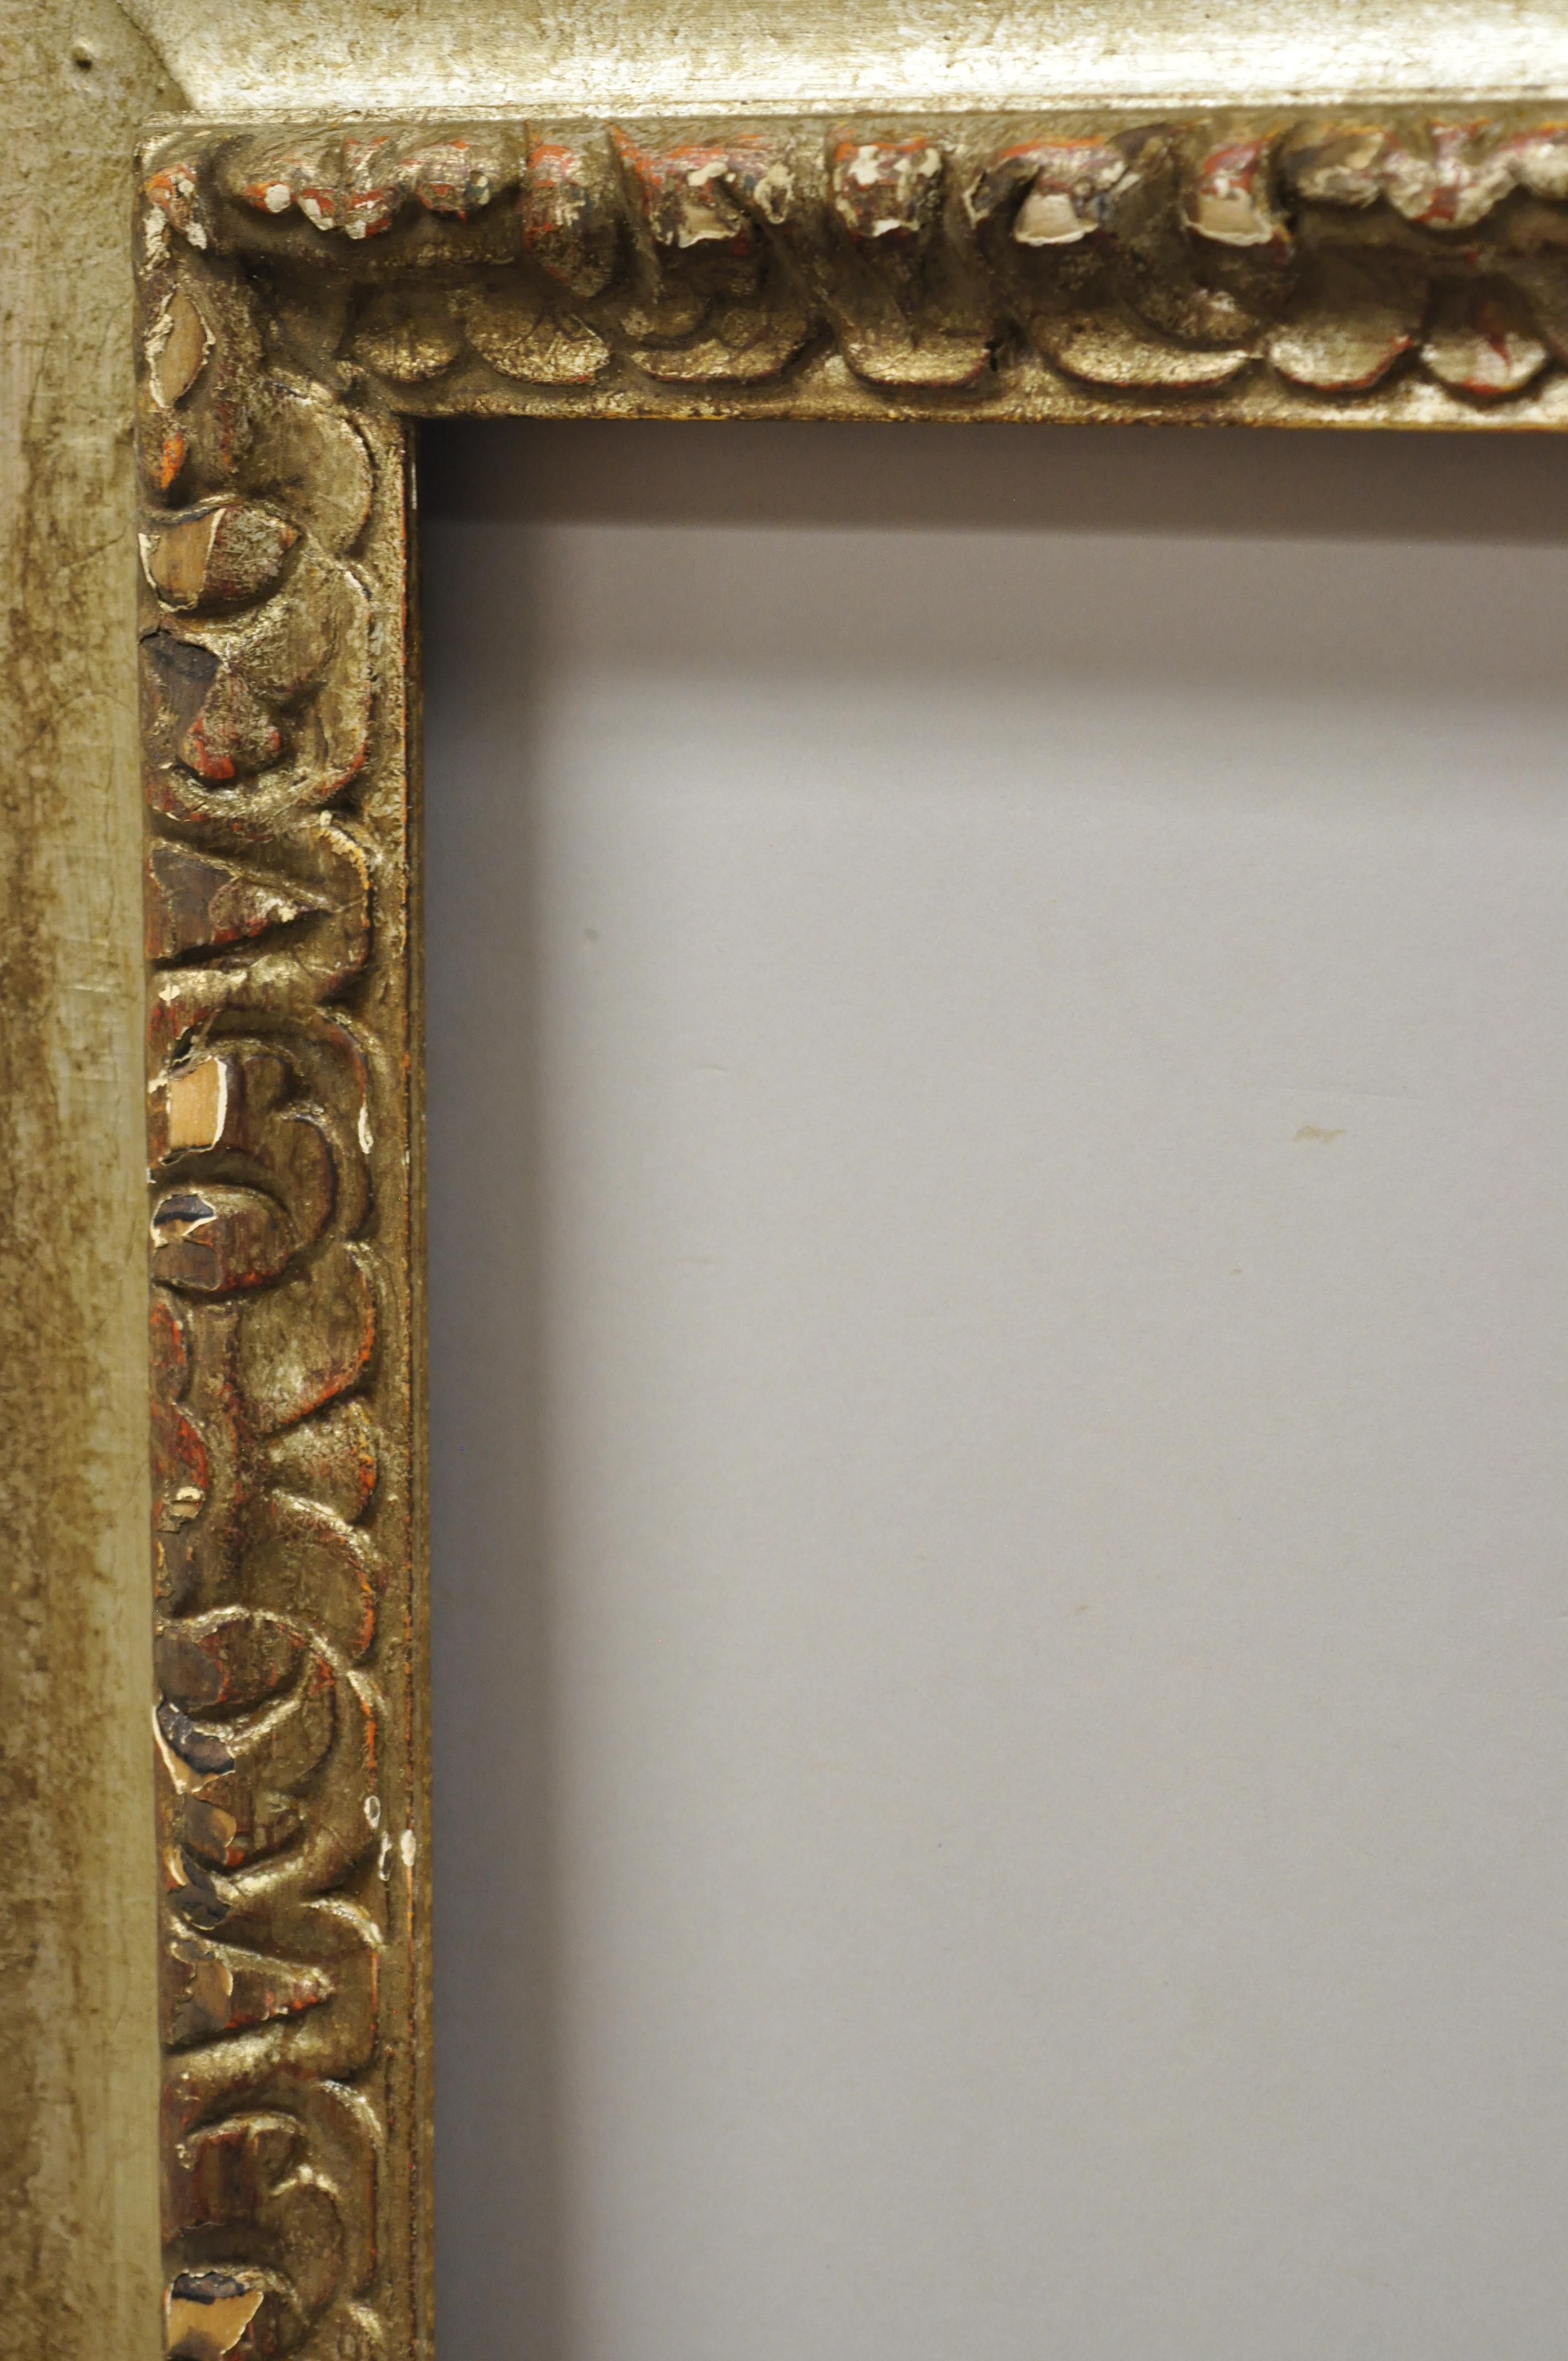 Antique Italian polychrome parcel gilt carved wood Florentine painting frame. Item features distressed polychrome painted gold/silver gilt finish, solid wood frame, hand carved details, desirable distressed/weathered old world finish, circa